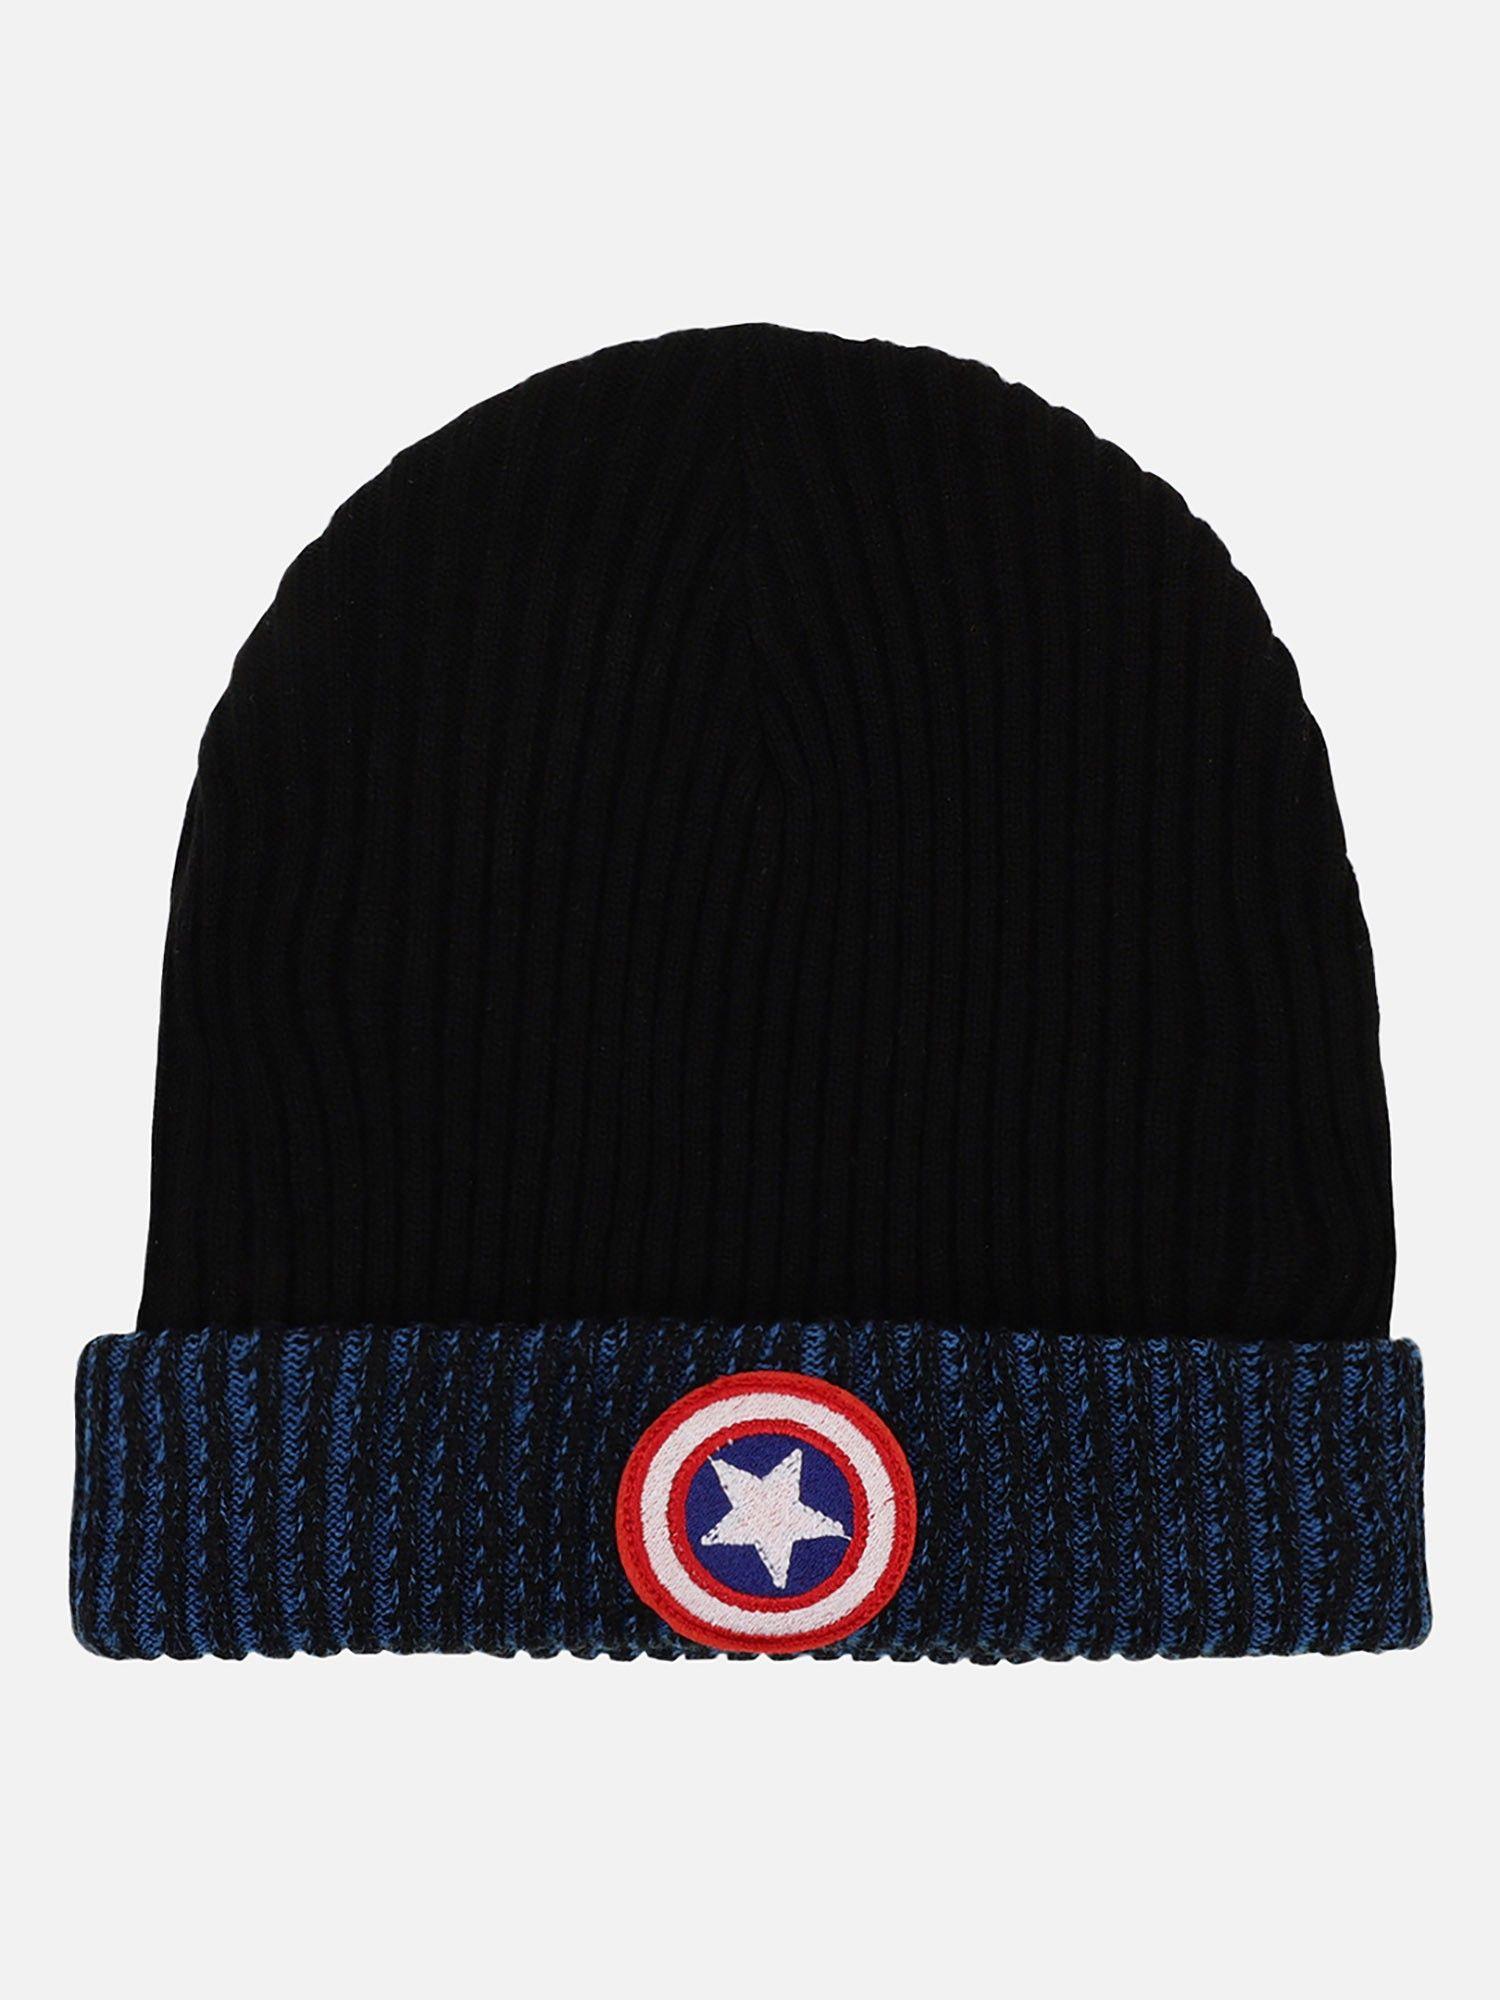 captain america featured black/blue beanies for young men